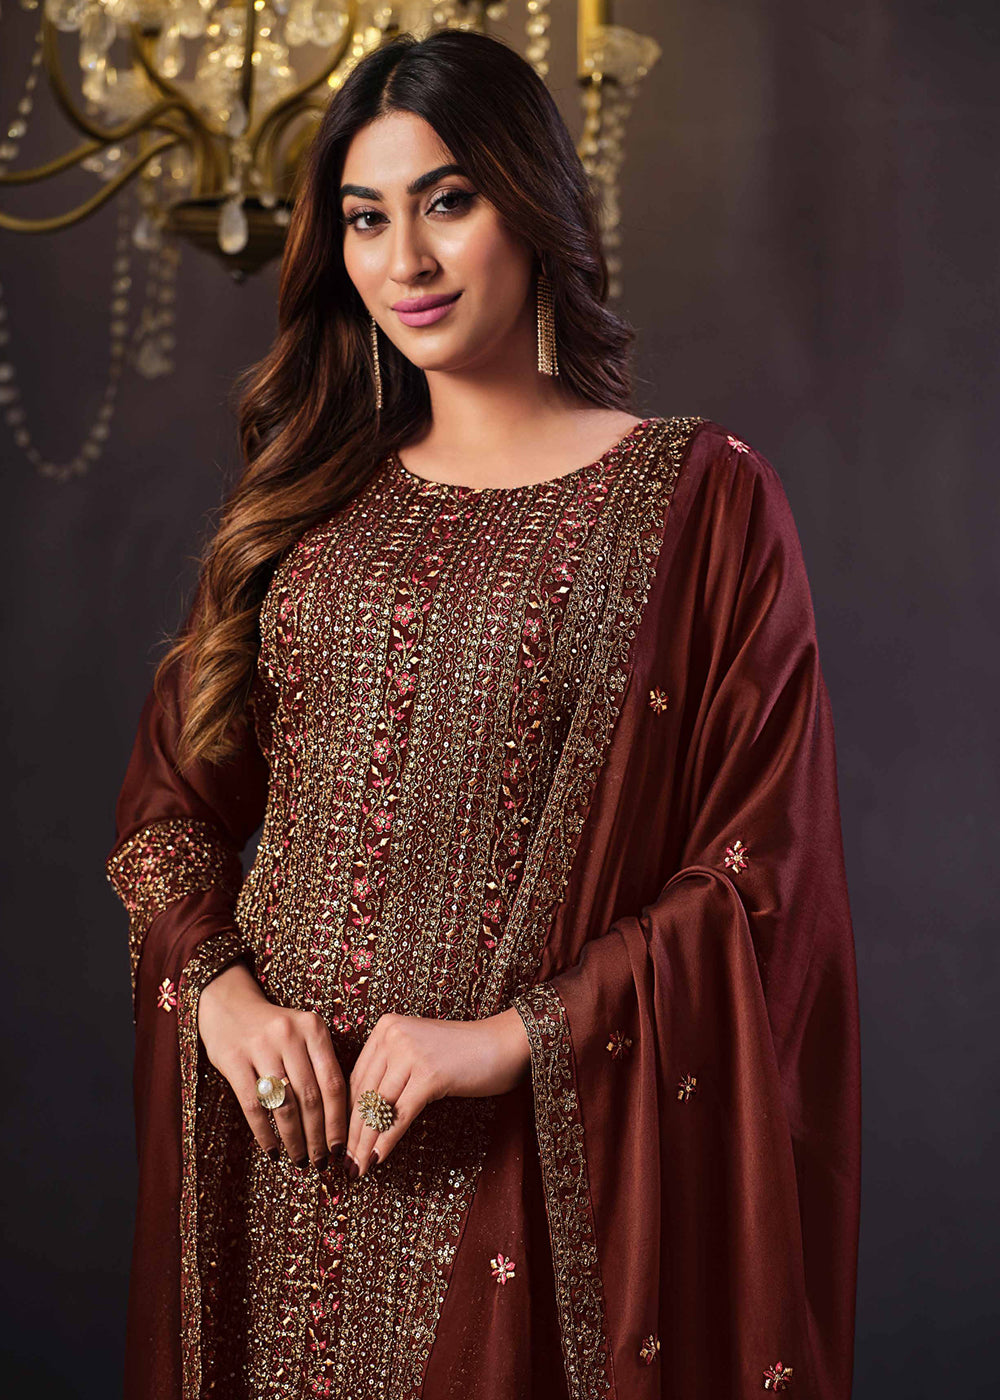 Buy Now Two Tone Cottonic Georgette Maroon Function Style Salwar Suit Online in USA, UK, Canada, Germany, Australia & Worldwide at Empress Clothing.